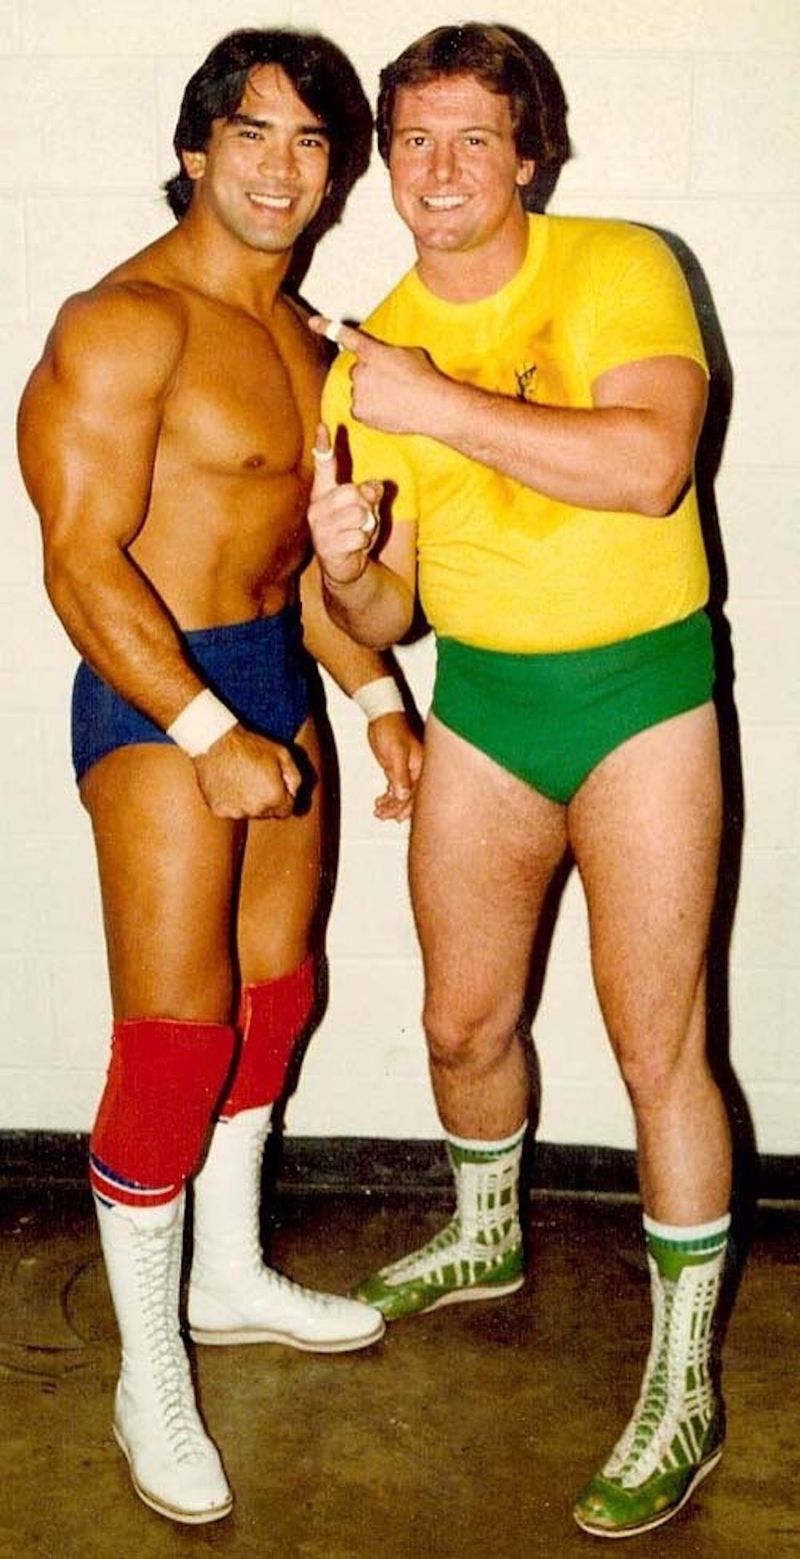 Ricky "The Dragon" Steamboat and Rowdy Roddy Piper